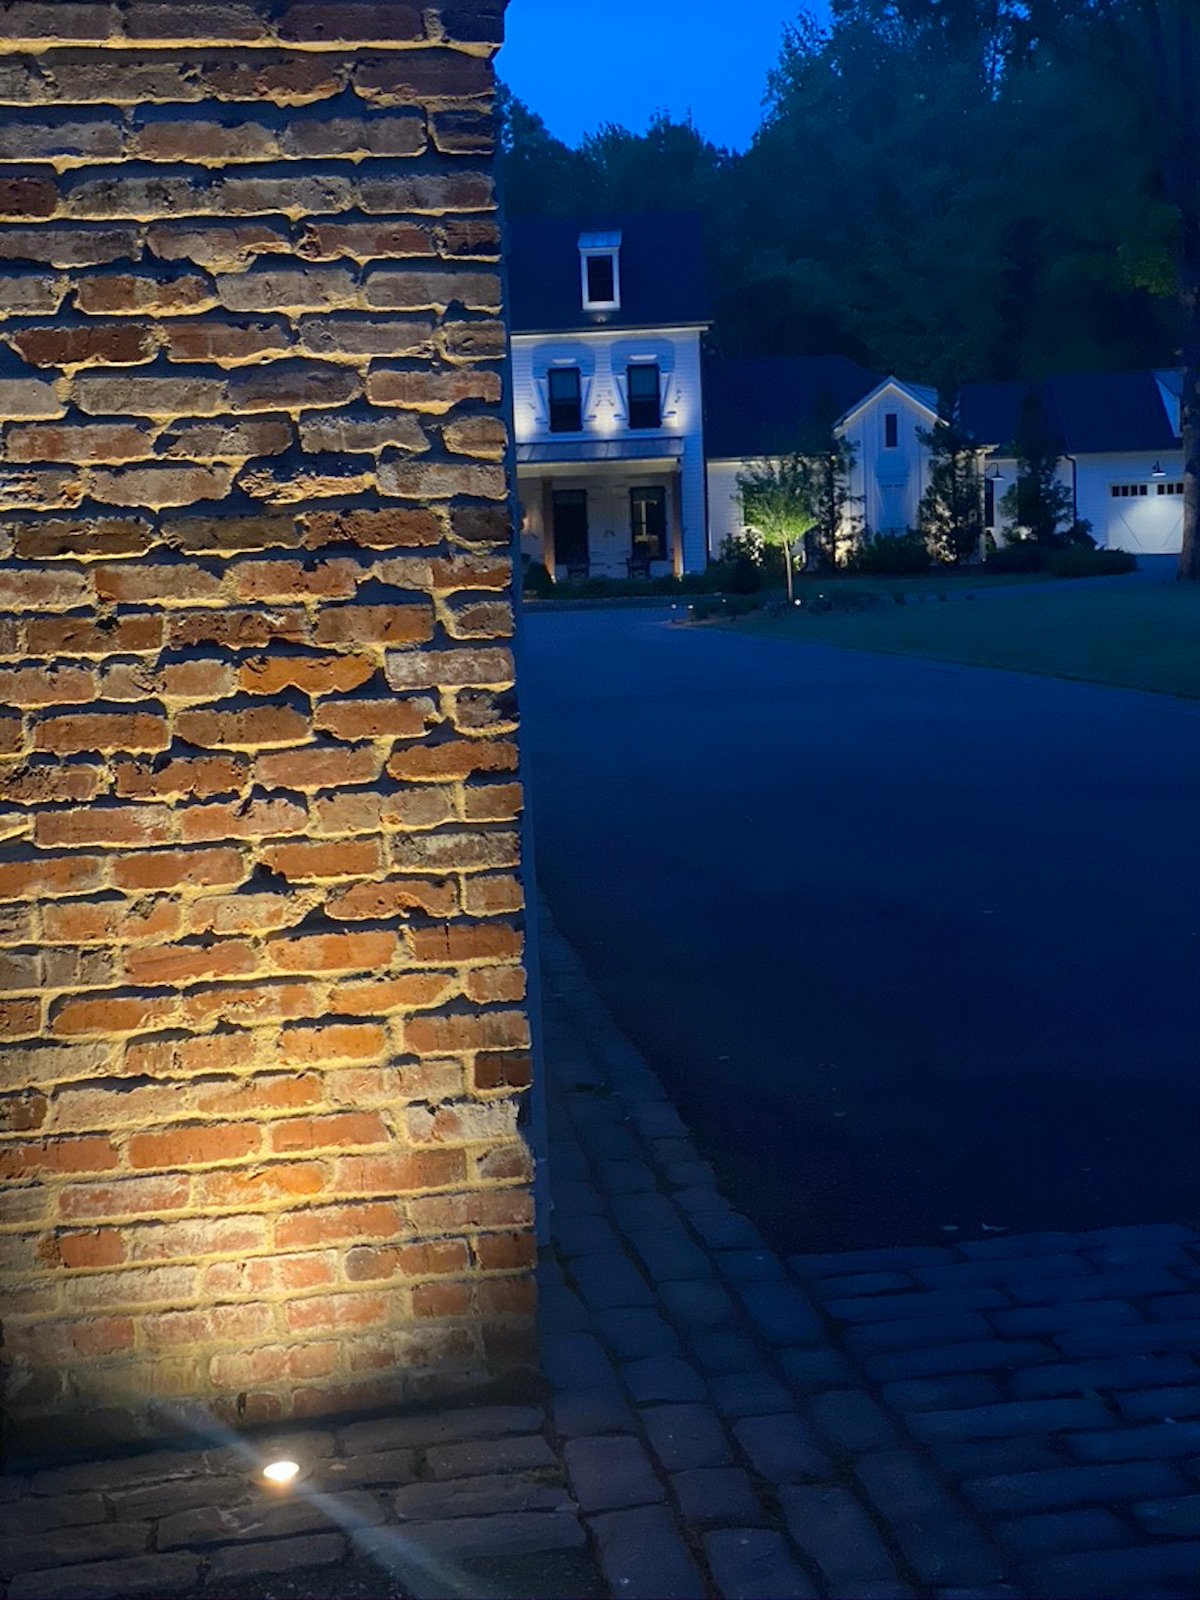 uplighting on brick wall with house in background